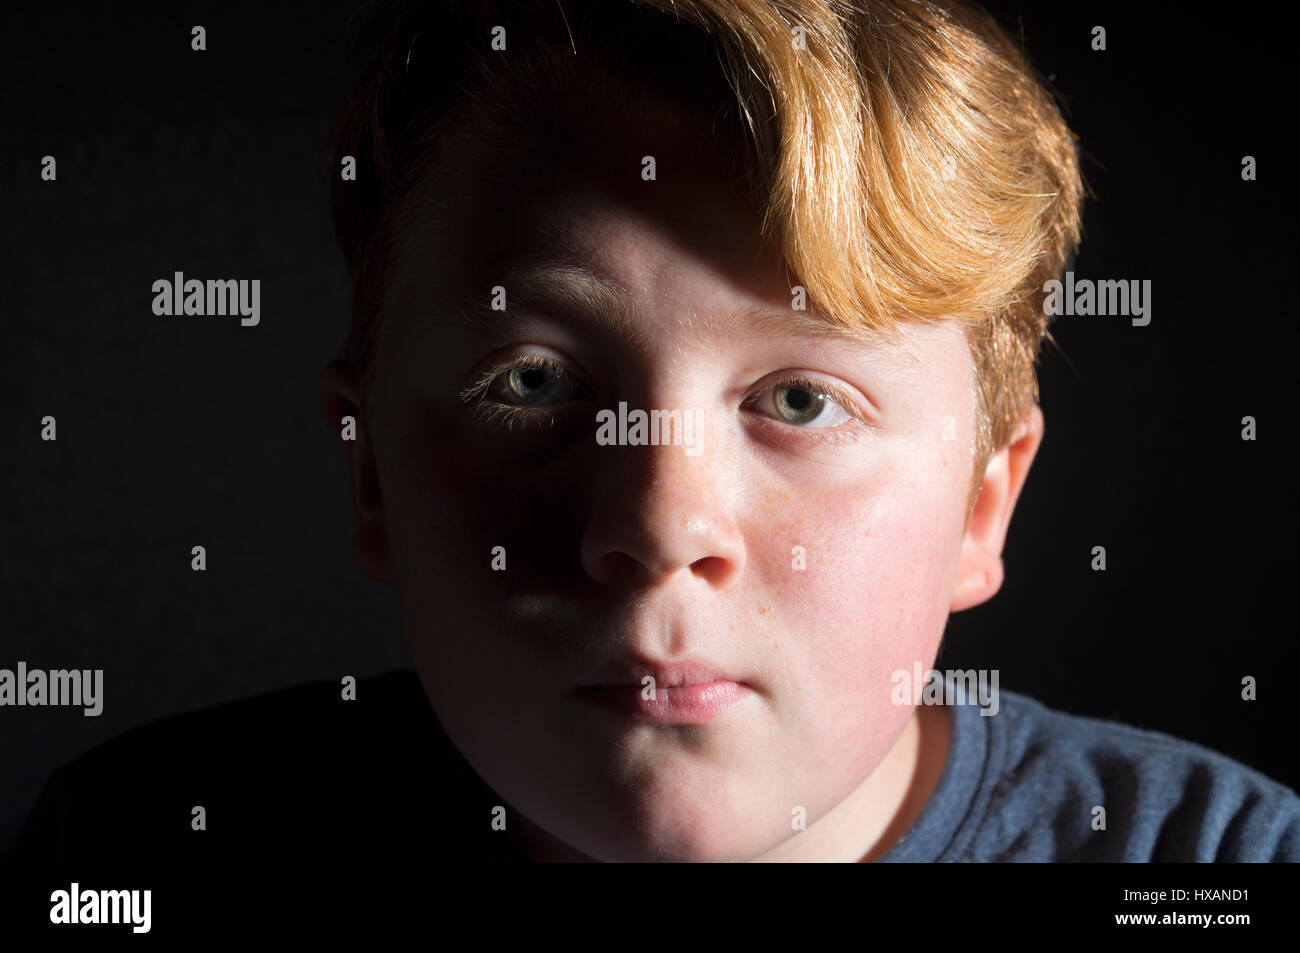 Ginger haired boy Stock Photo